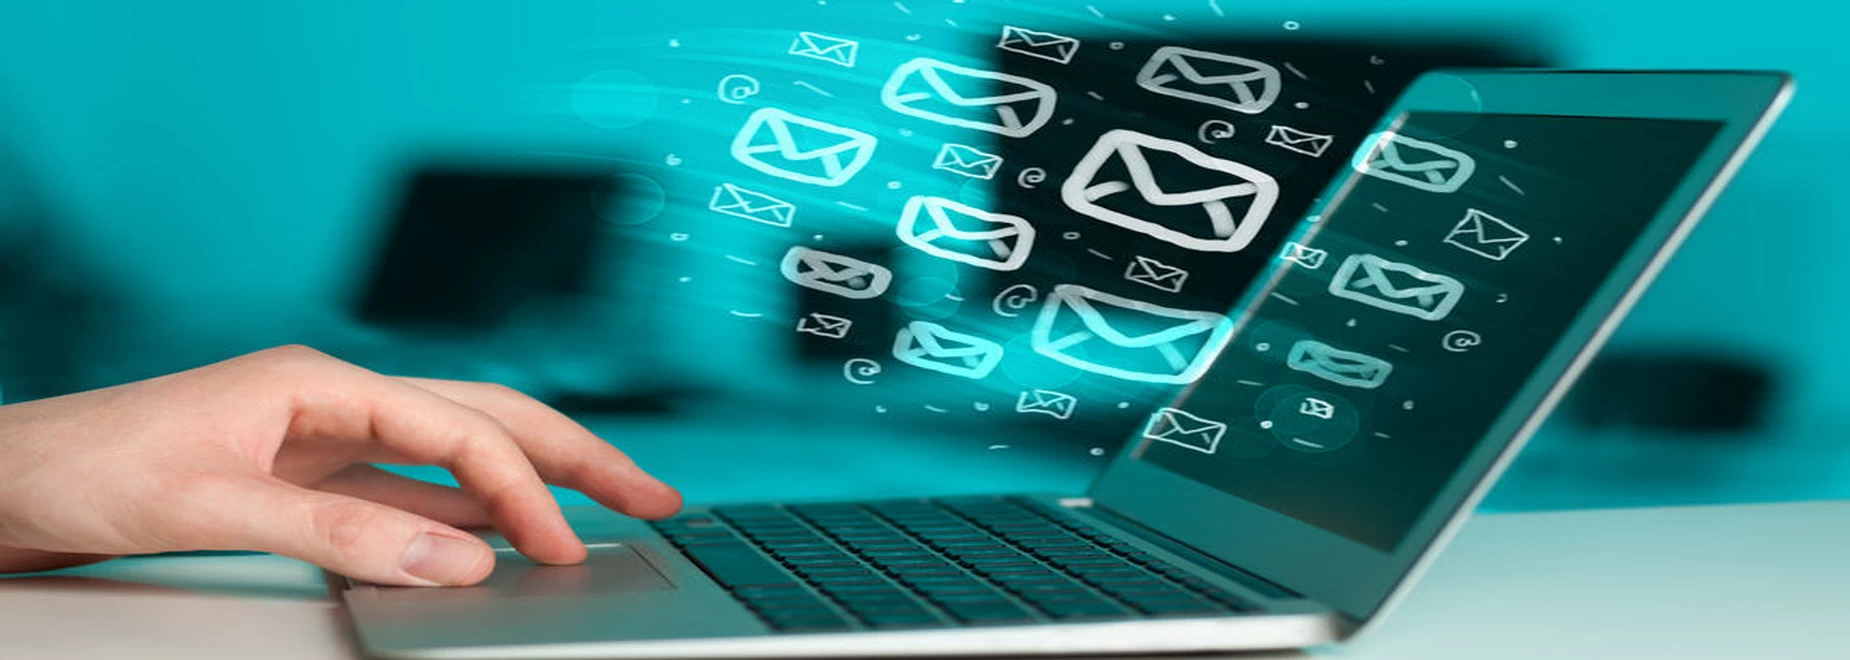 Electronic Mail System